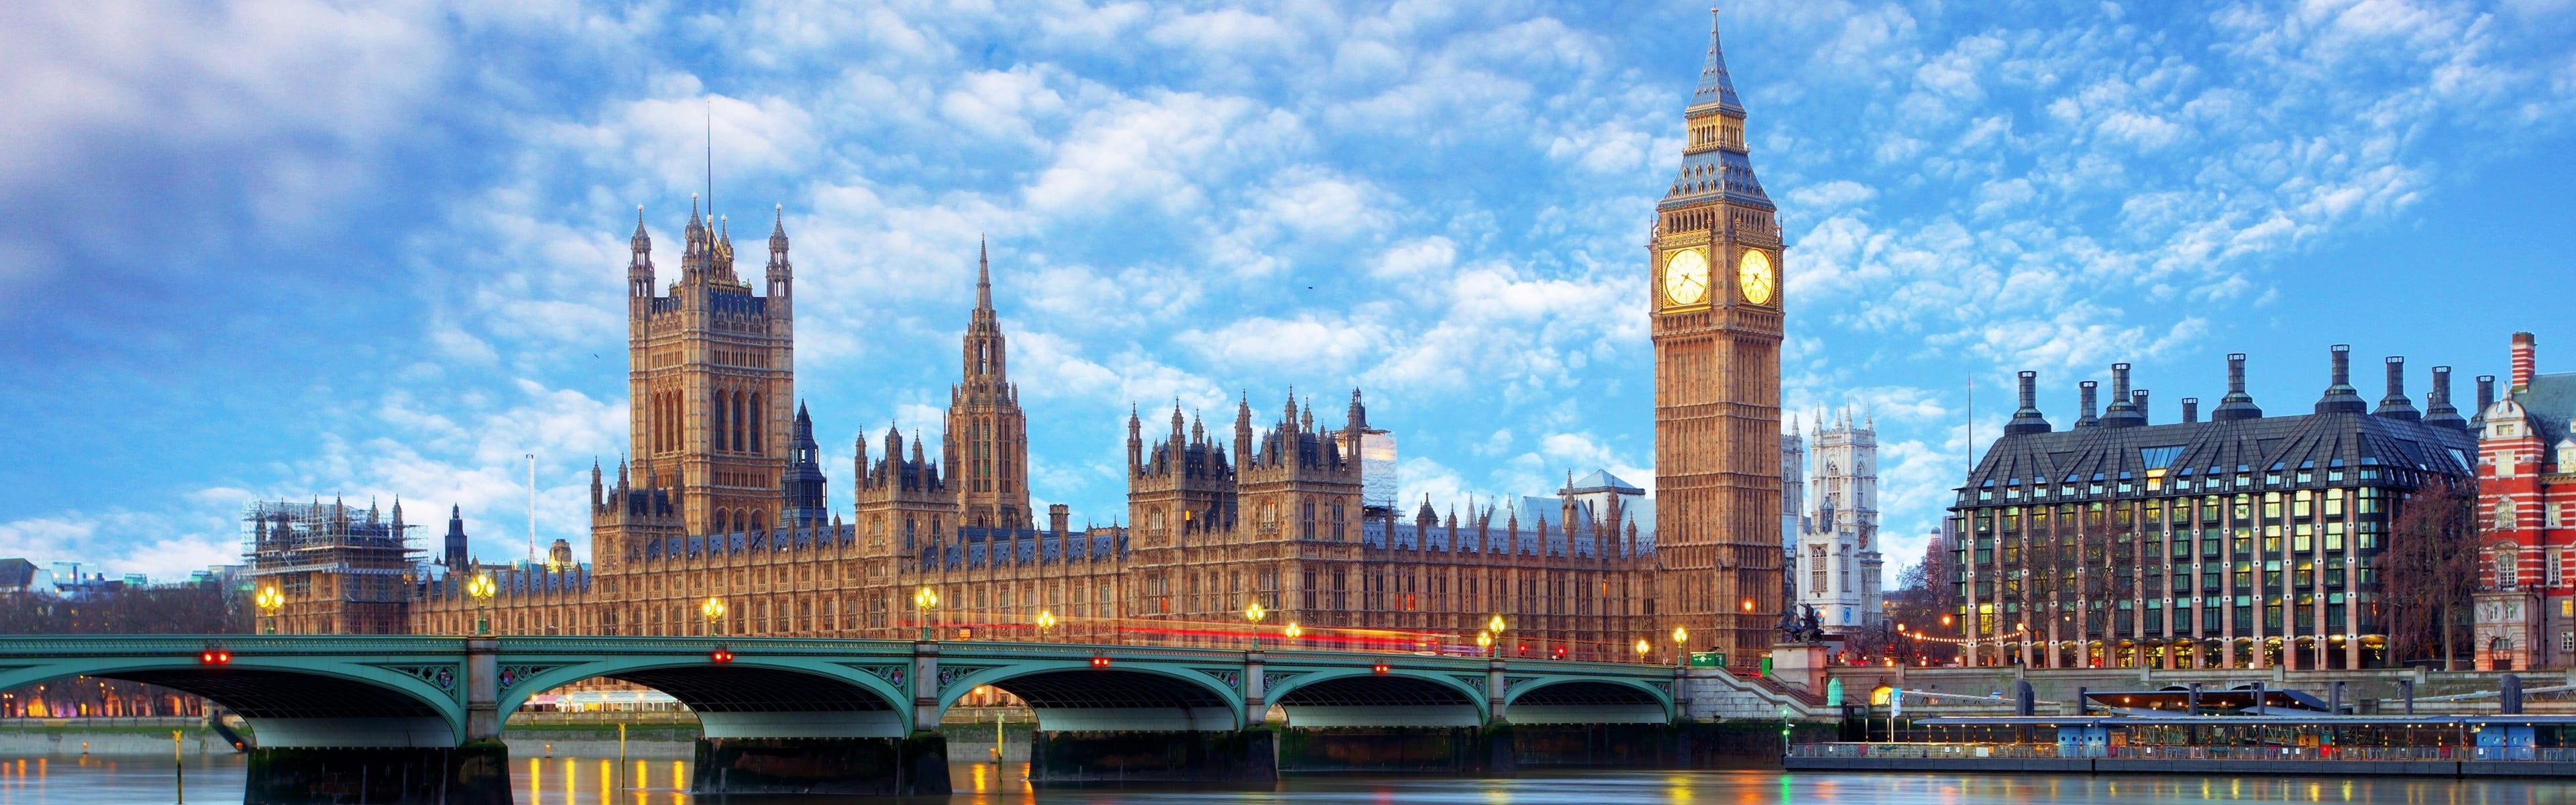 Palace: Houses of Parliament, Palace of Westminster, Well-known places in London. 3840x1200 Dual Screen Wallpaper.